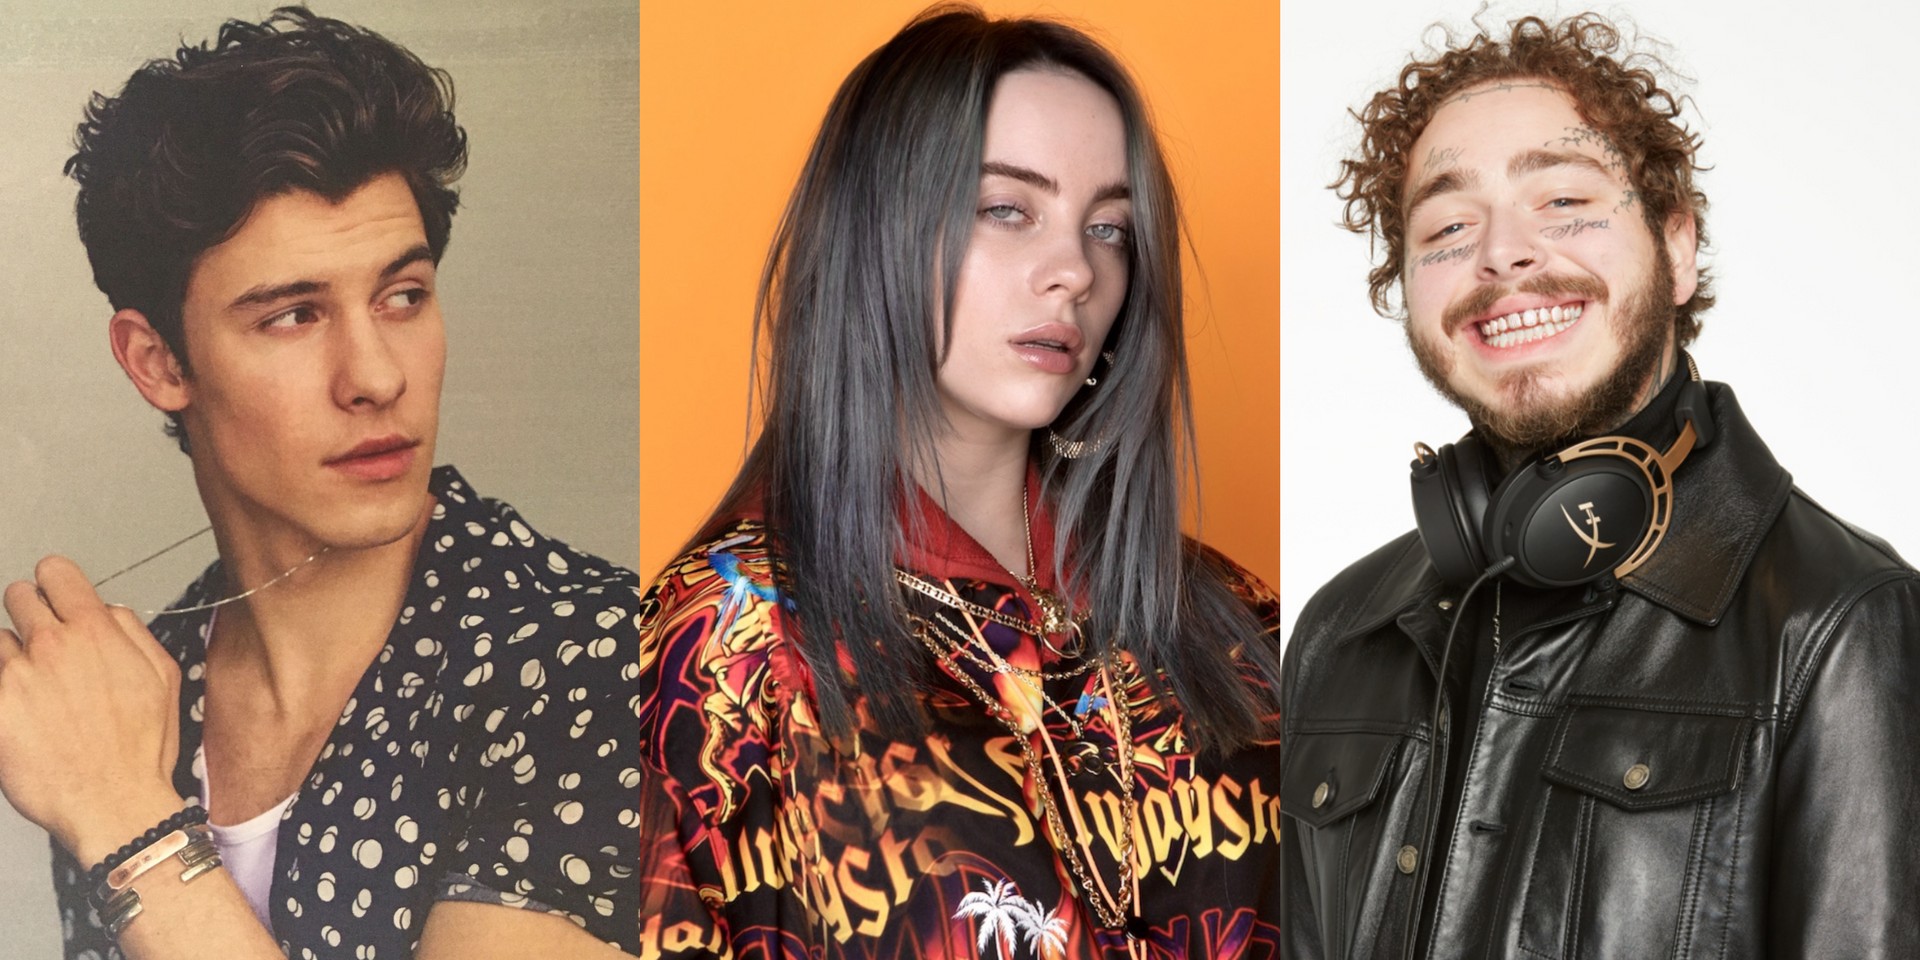 Billie Eilish, Post Malone and Shawn Mendes are among the most-streamed artists on Spotify in 2019